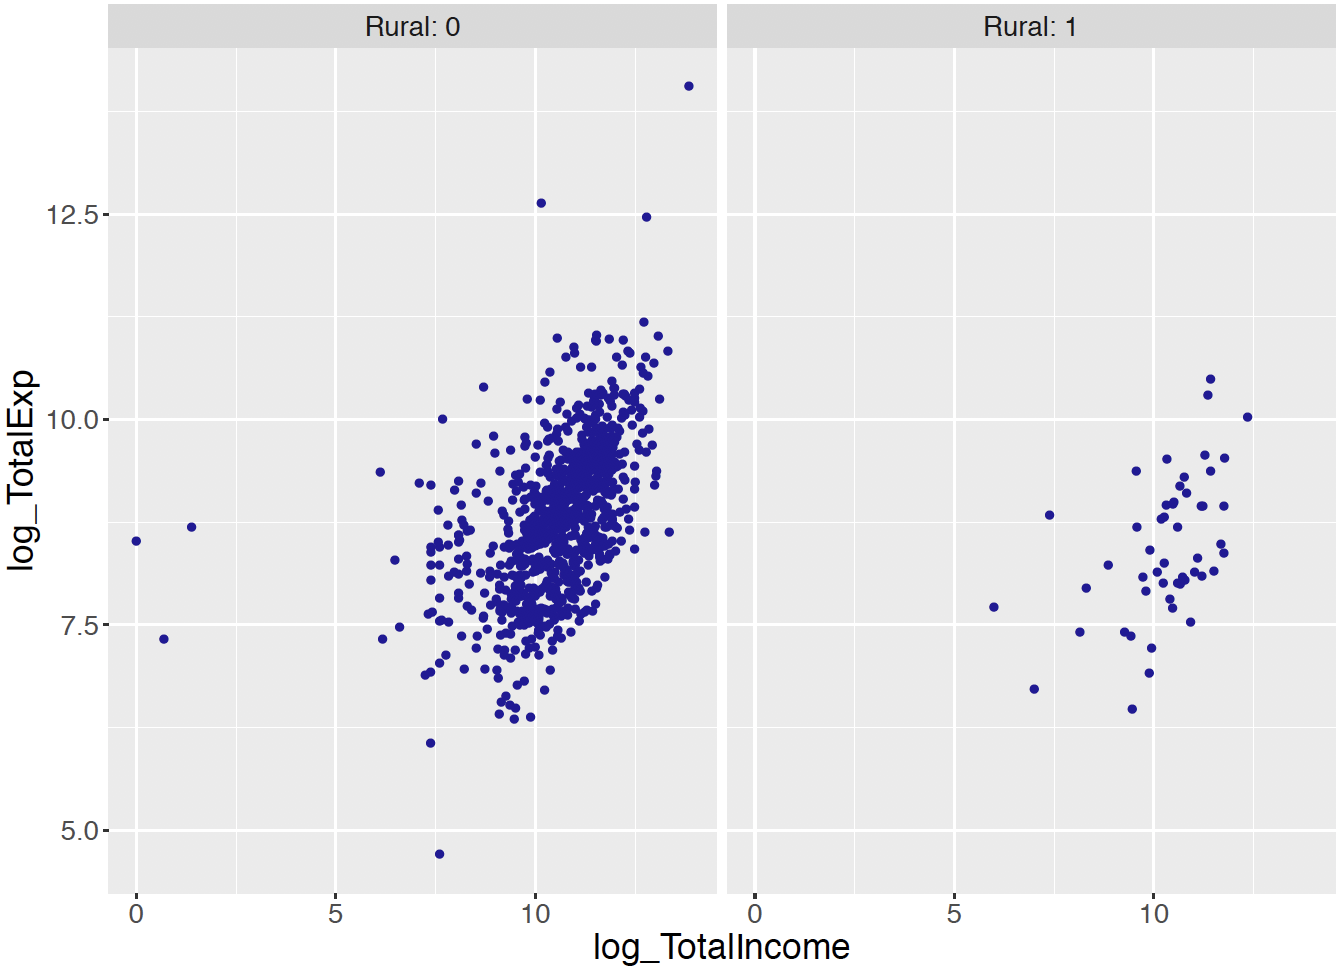 Scatterplot of log total income and log total expenditure for the urban and rural groups.